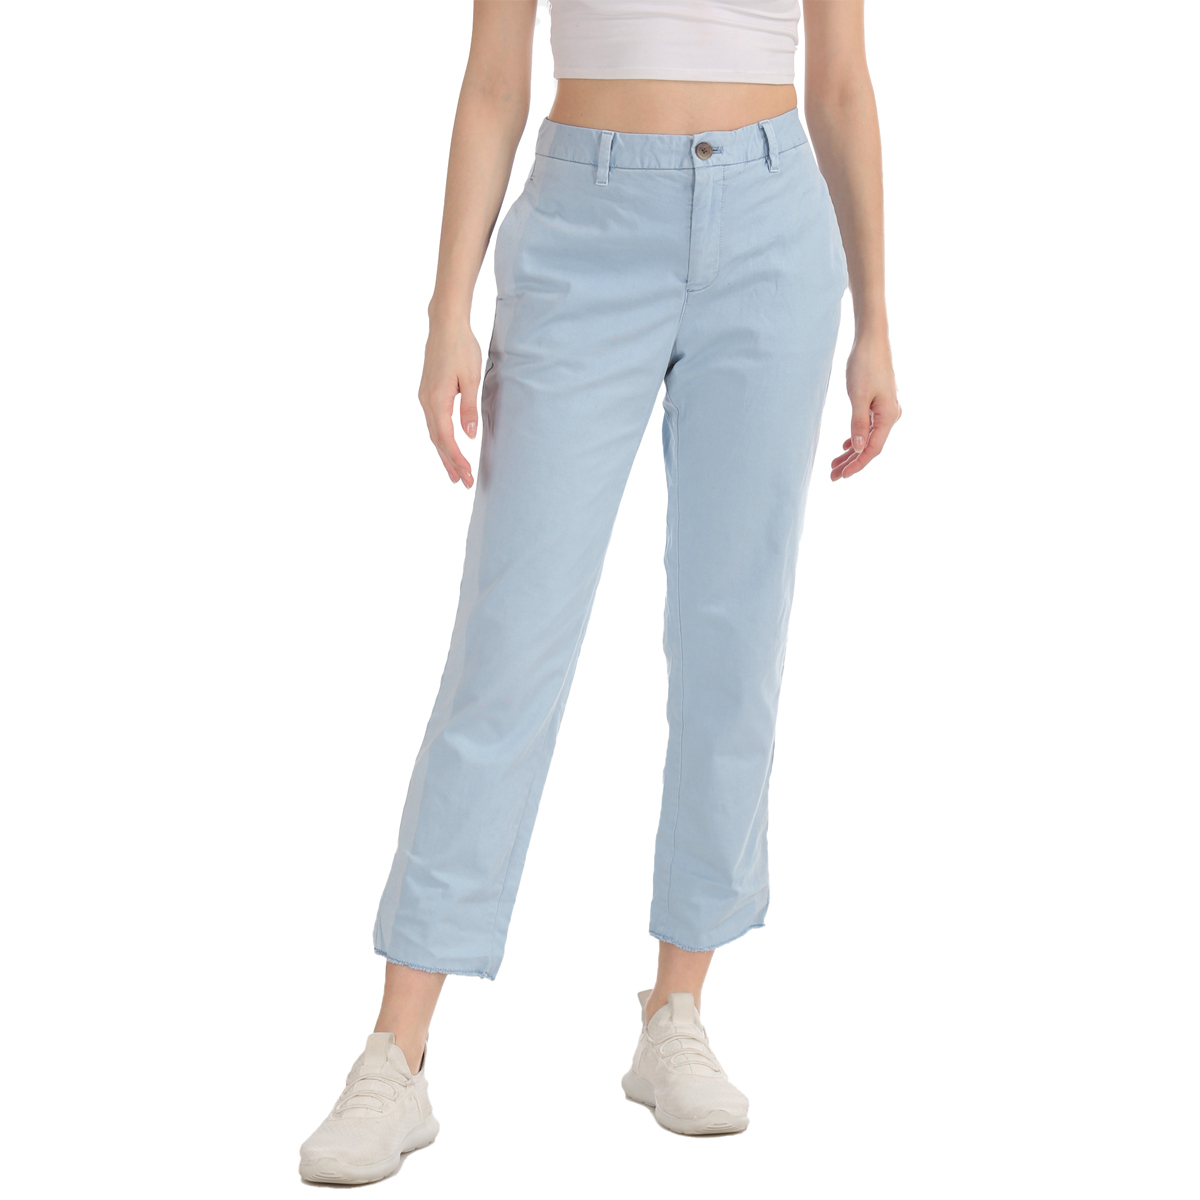 Gap Mid Rise Girlfriend Fit Solid Color Trouser Styled with Raw Hem & Faded Side Seam Line - Blue, Size-4